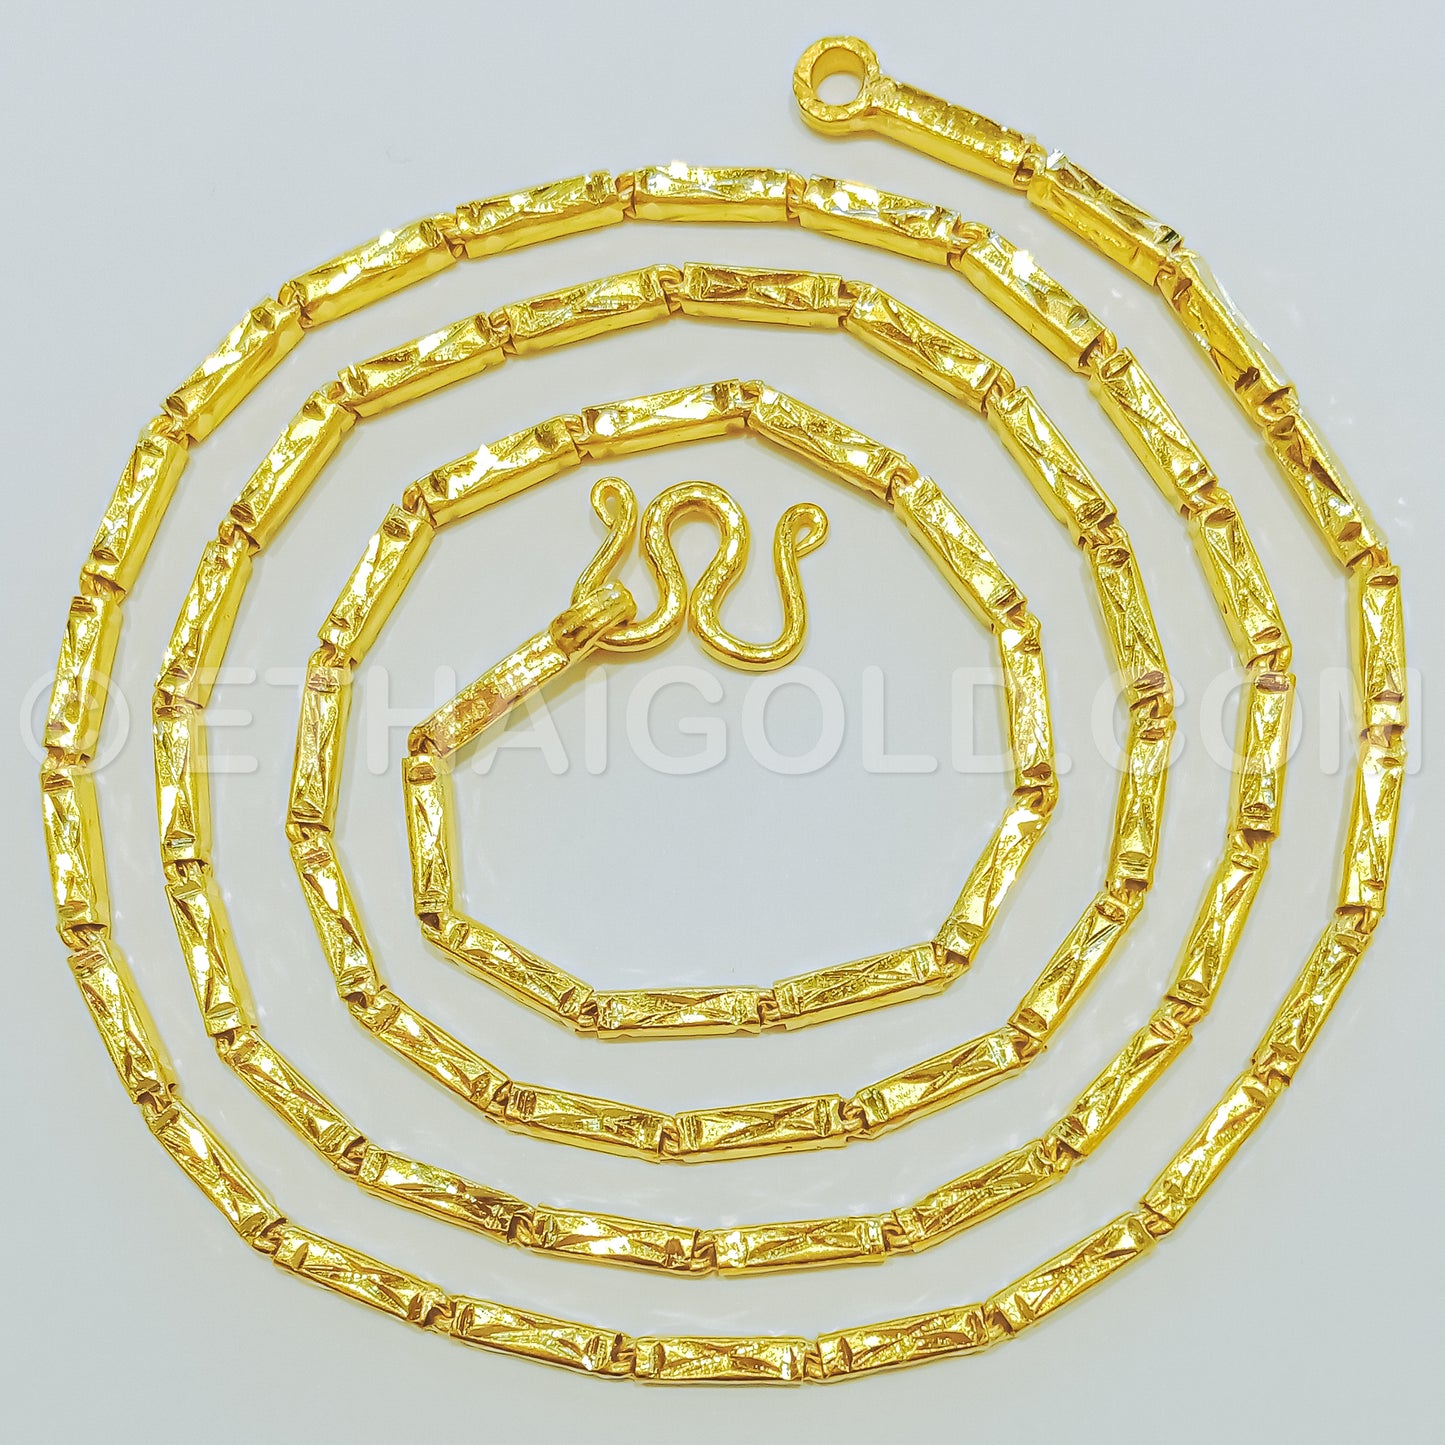 3 BAHT POLISHED DIAMOND-CUT SOLID SQUARE BARREL CHAIN NECKLACE IN 23K GOLD (ID: N3203B)